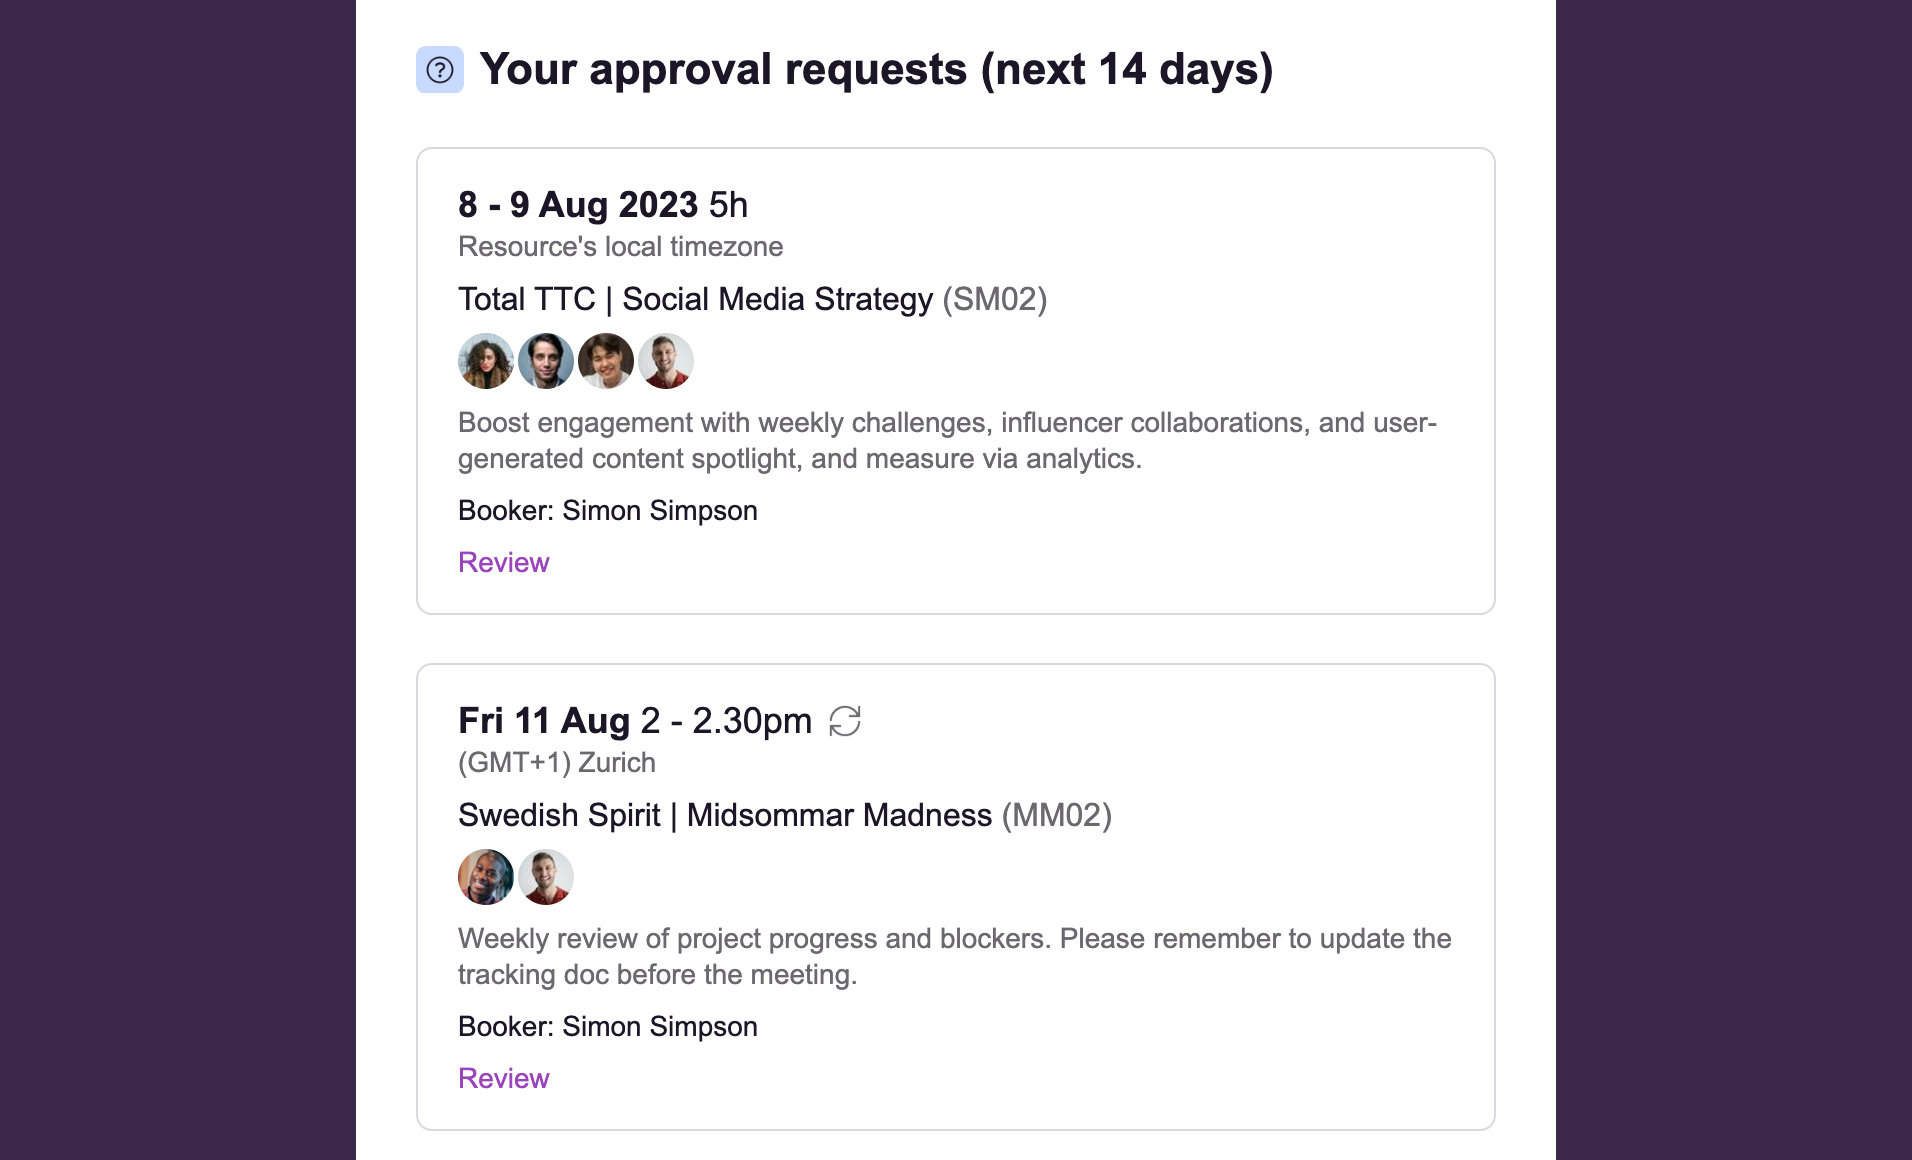 pending approval requests daily schedule email